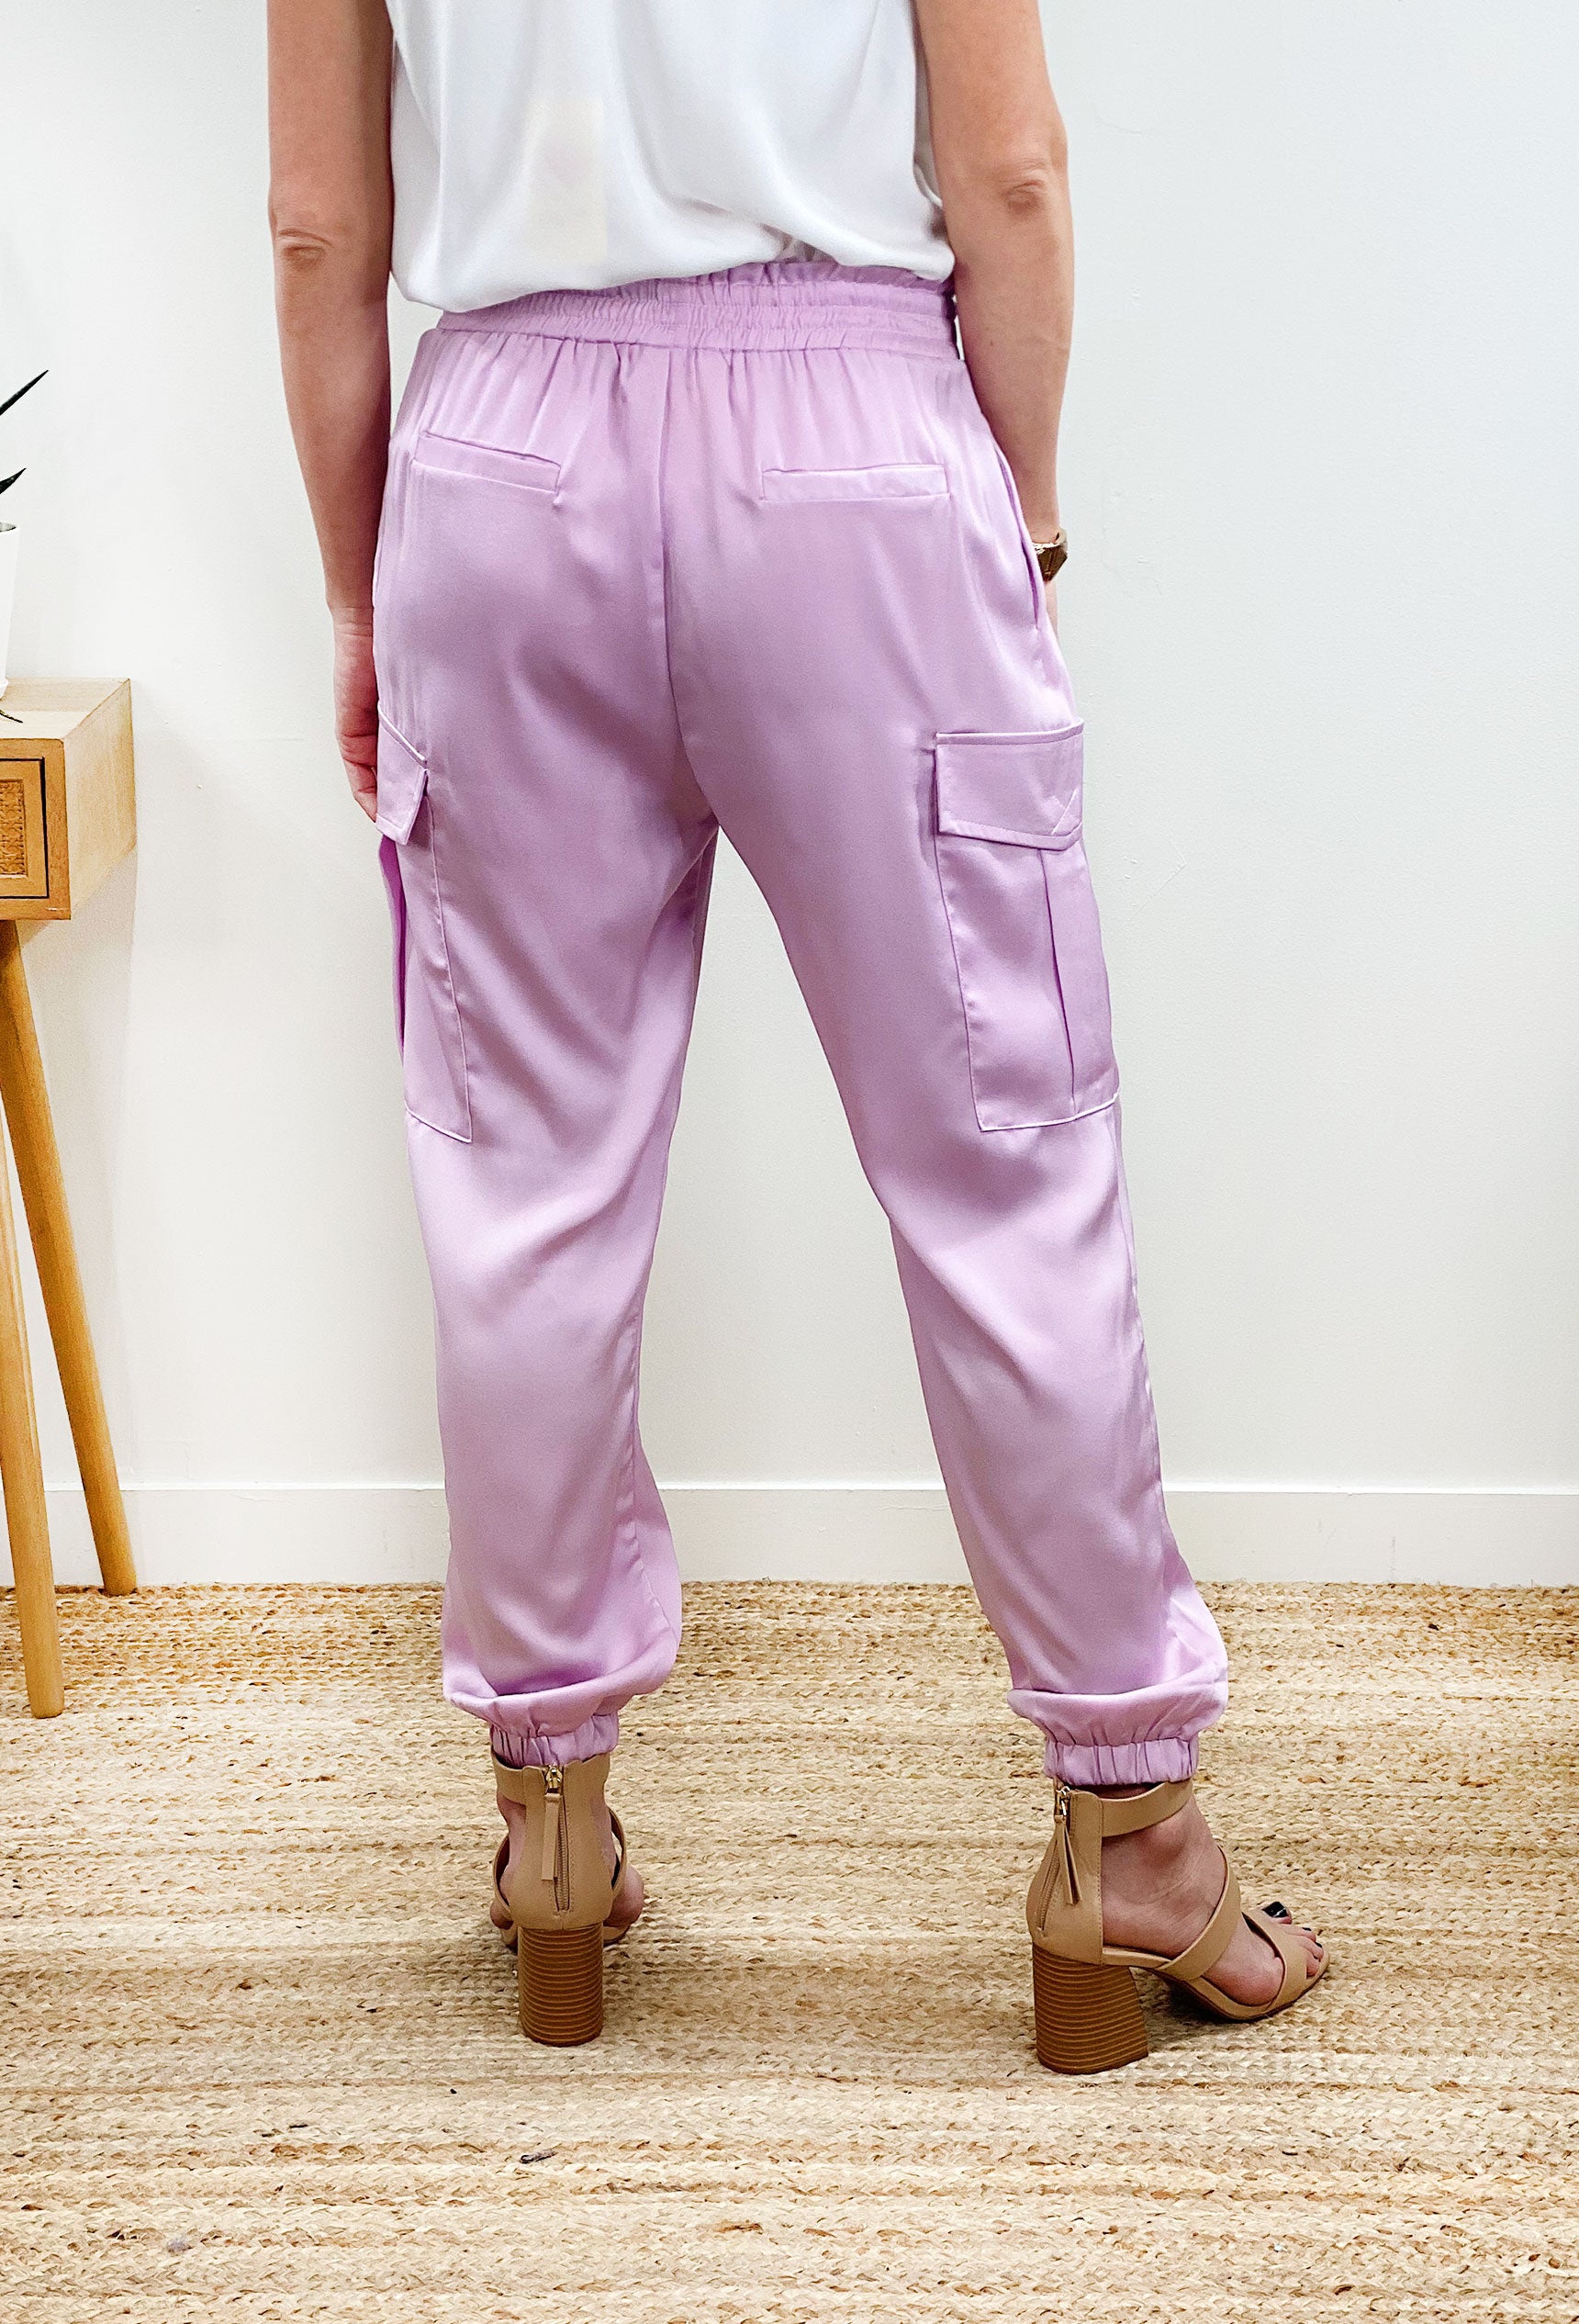 Make Or Break Joggers, Light purple joggers with cargo pockets and self tie detailing